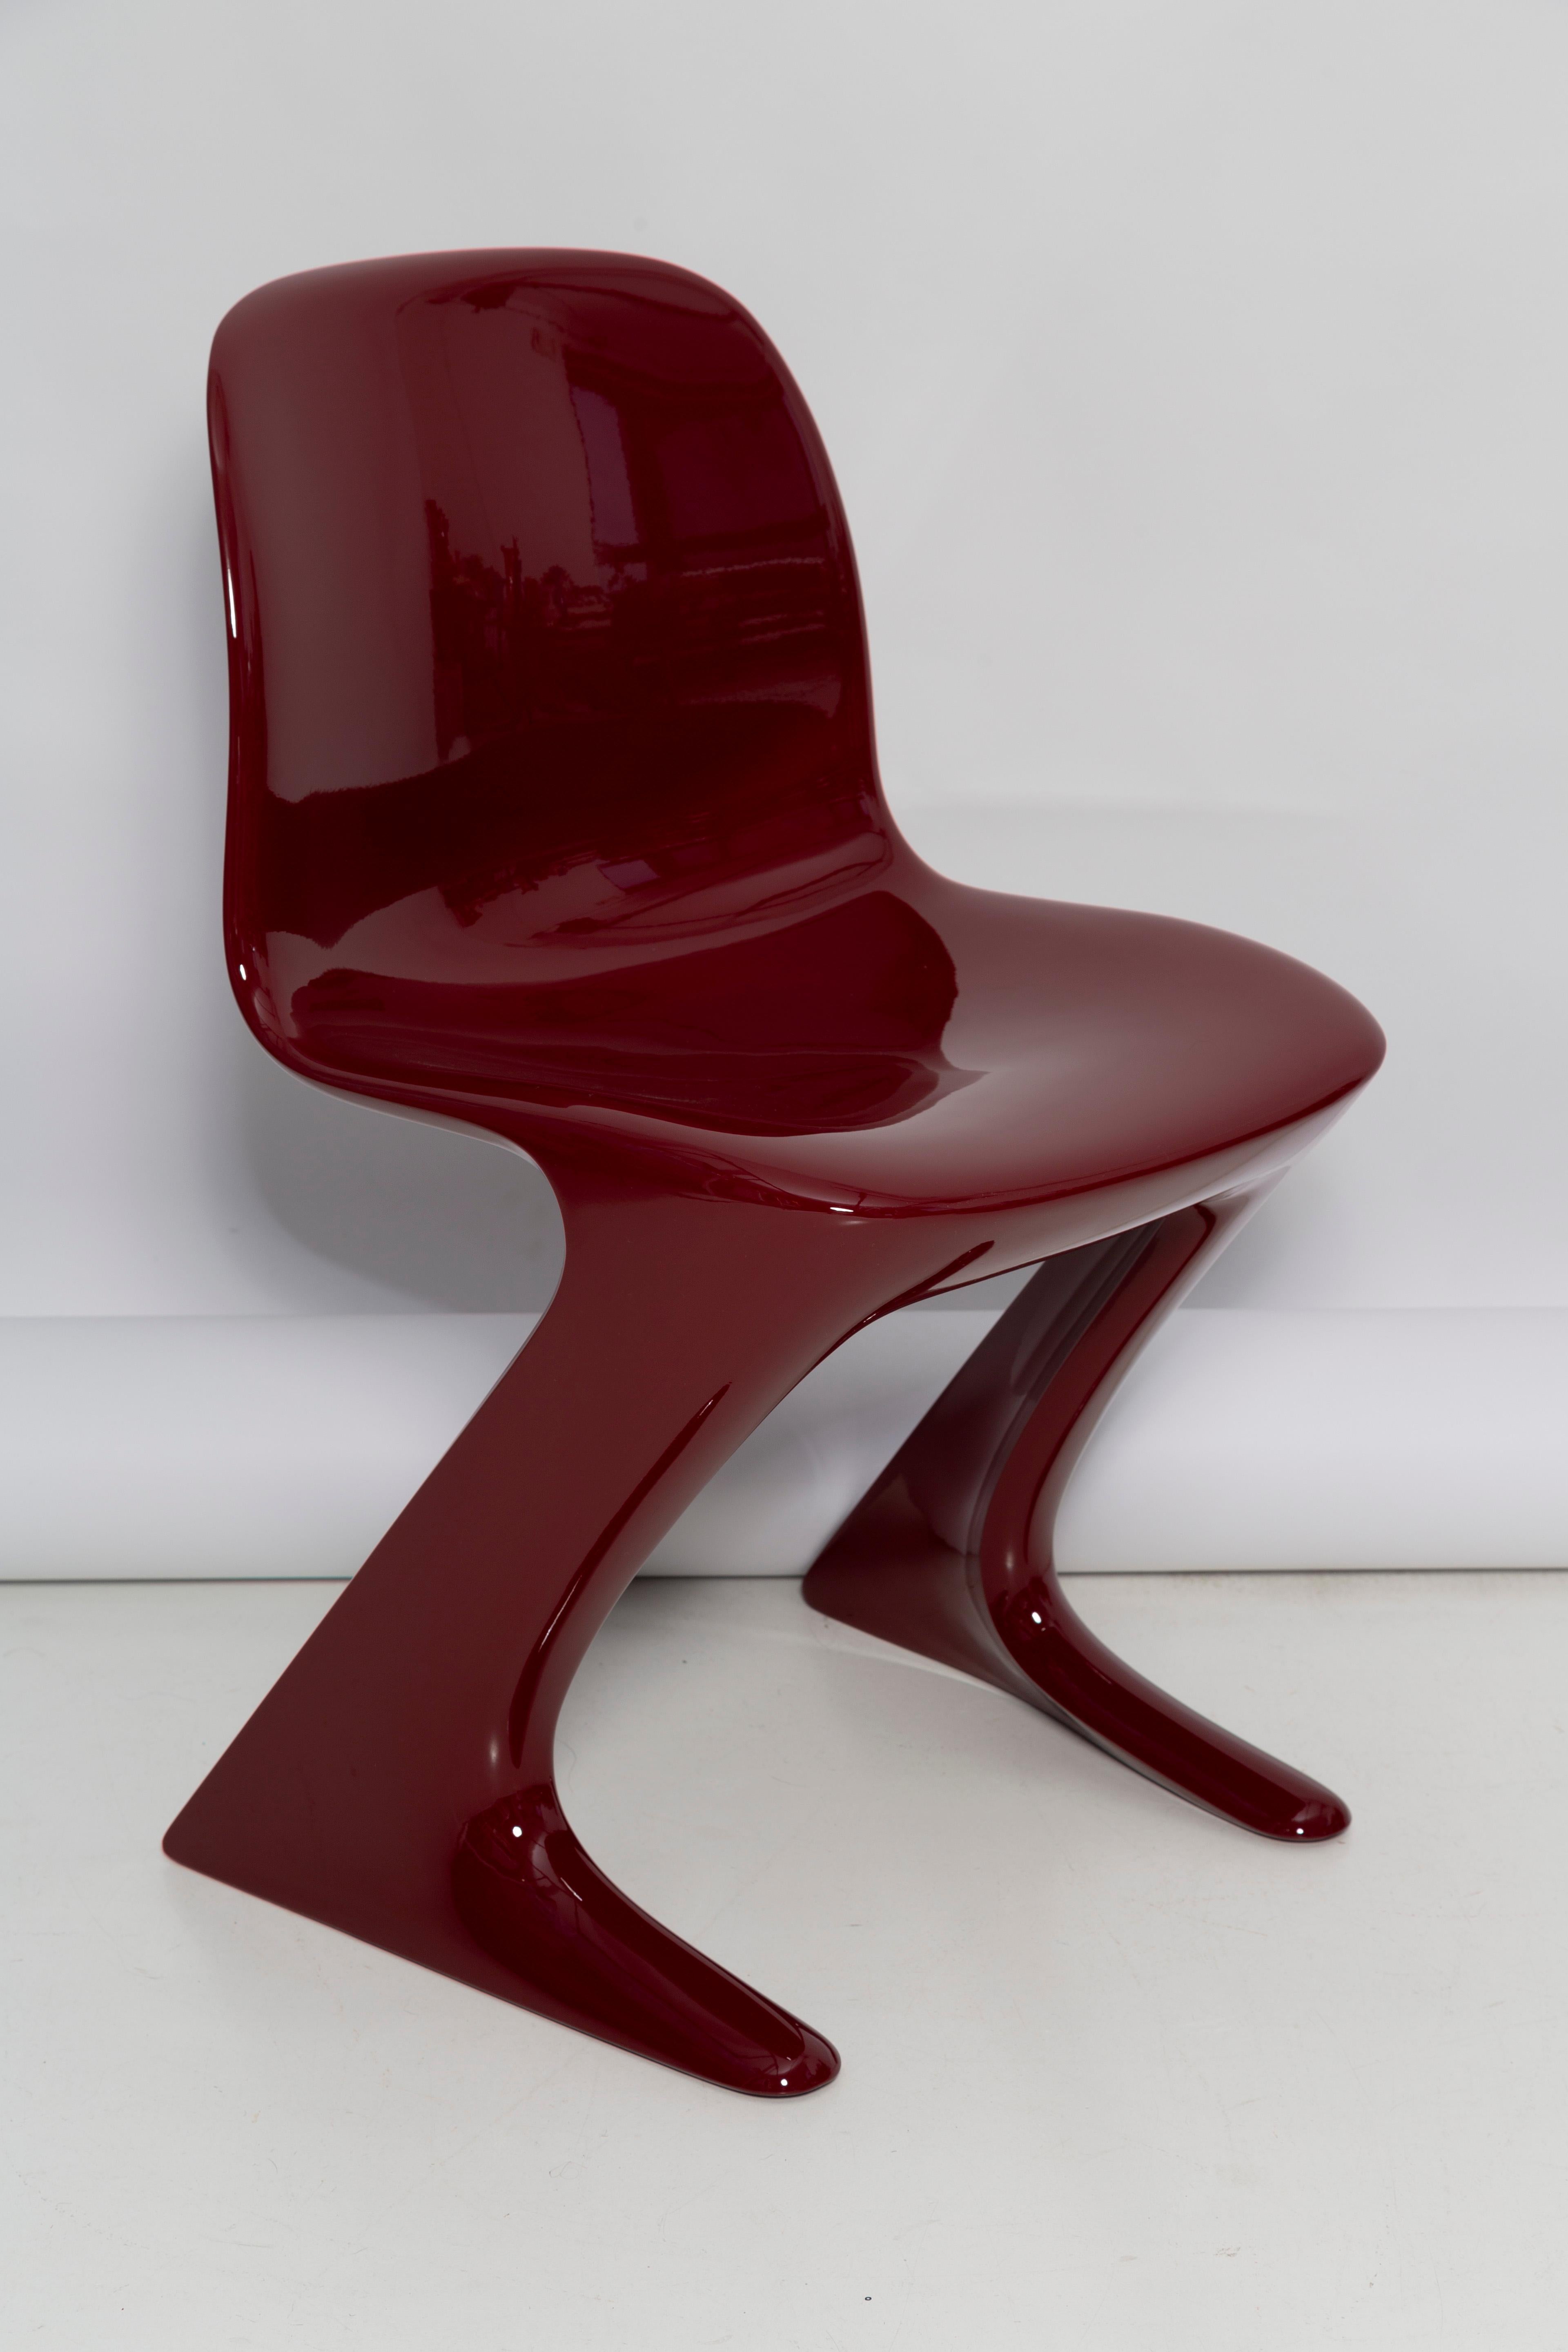 Set of Three Red Wine Kangaroo Chairs Designed by Ernst Moeckl, Germany, 1968 For Sale 2